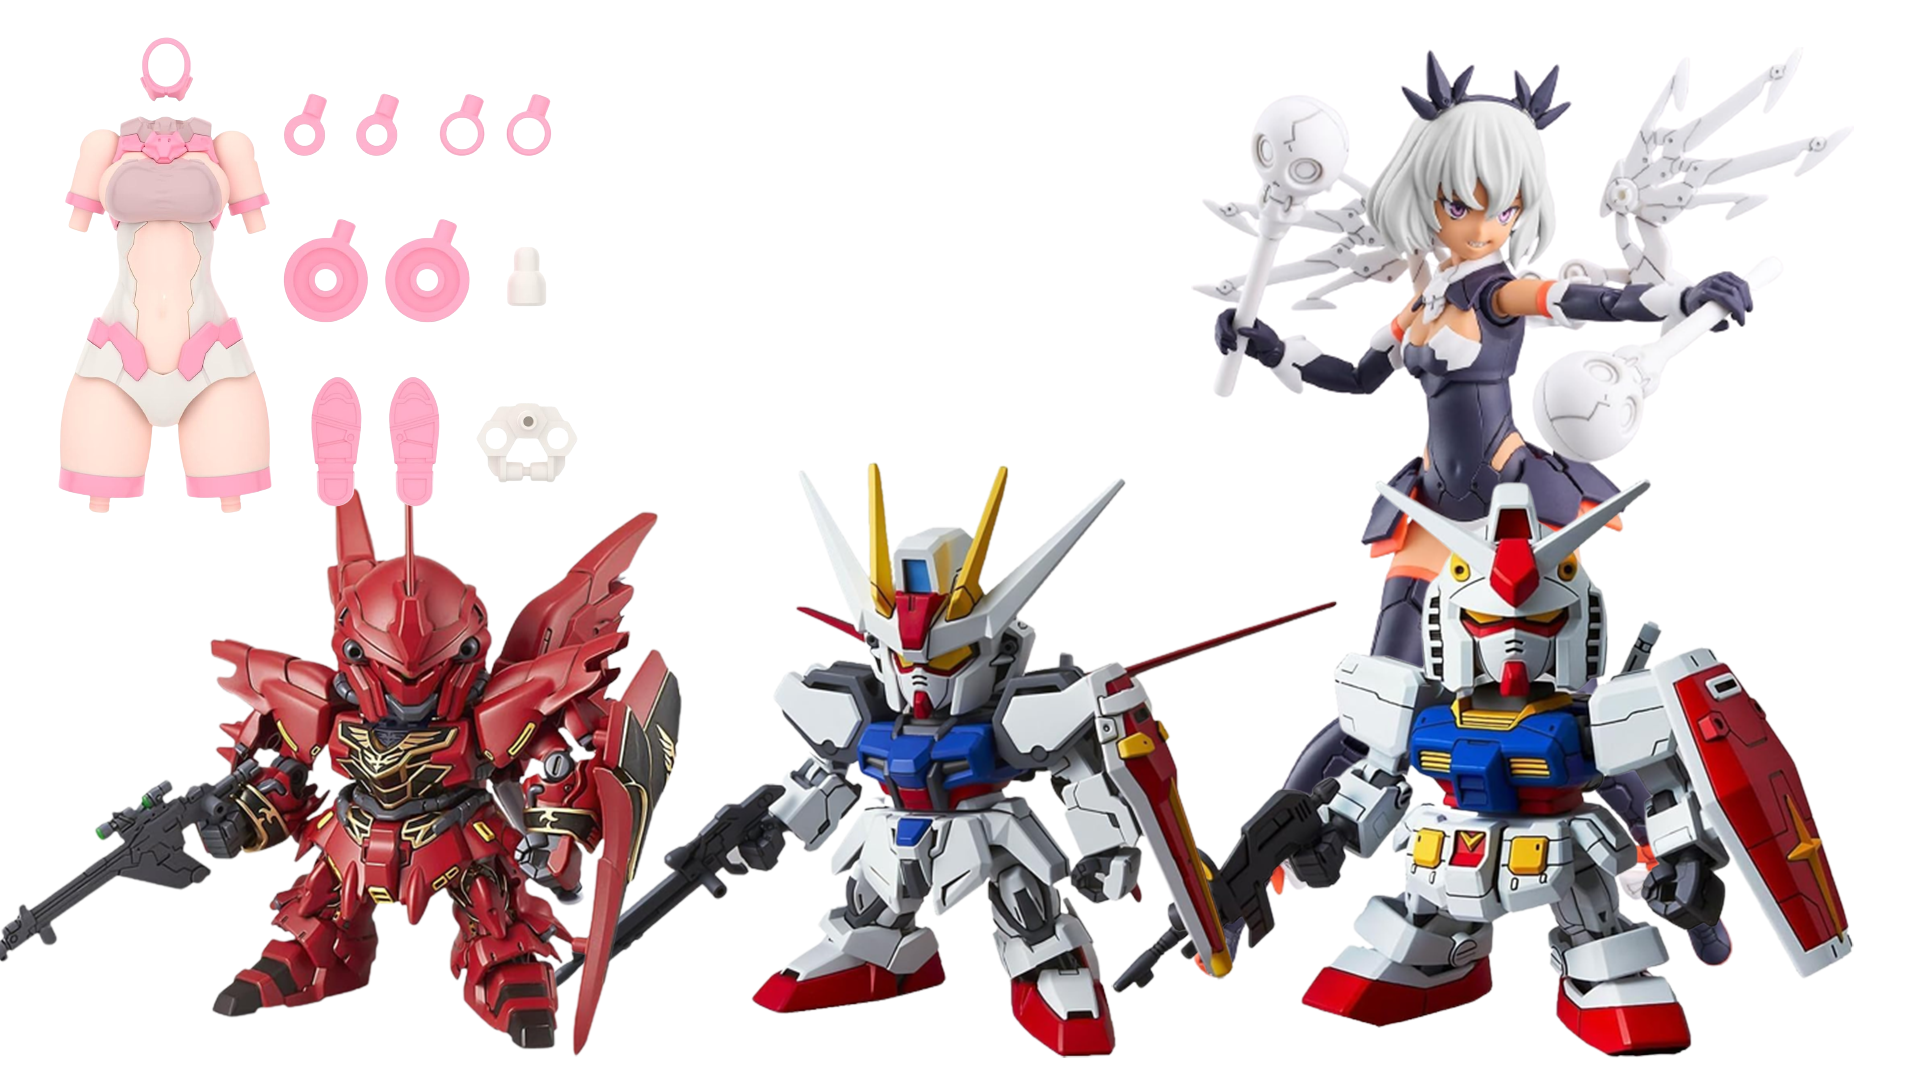 New In Stock: Bandai's SD EX Series and 30MS!